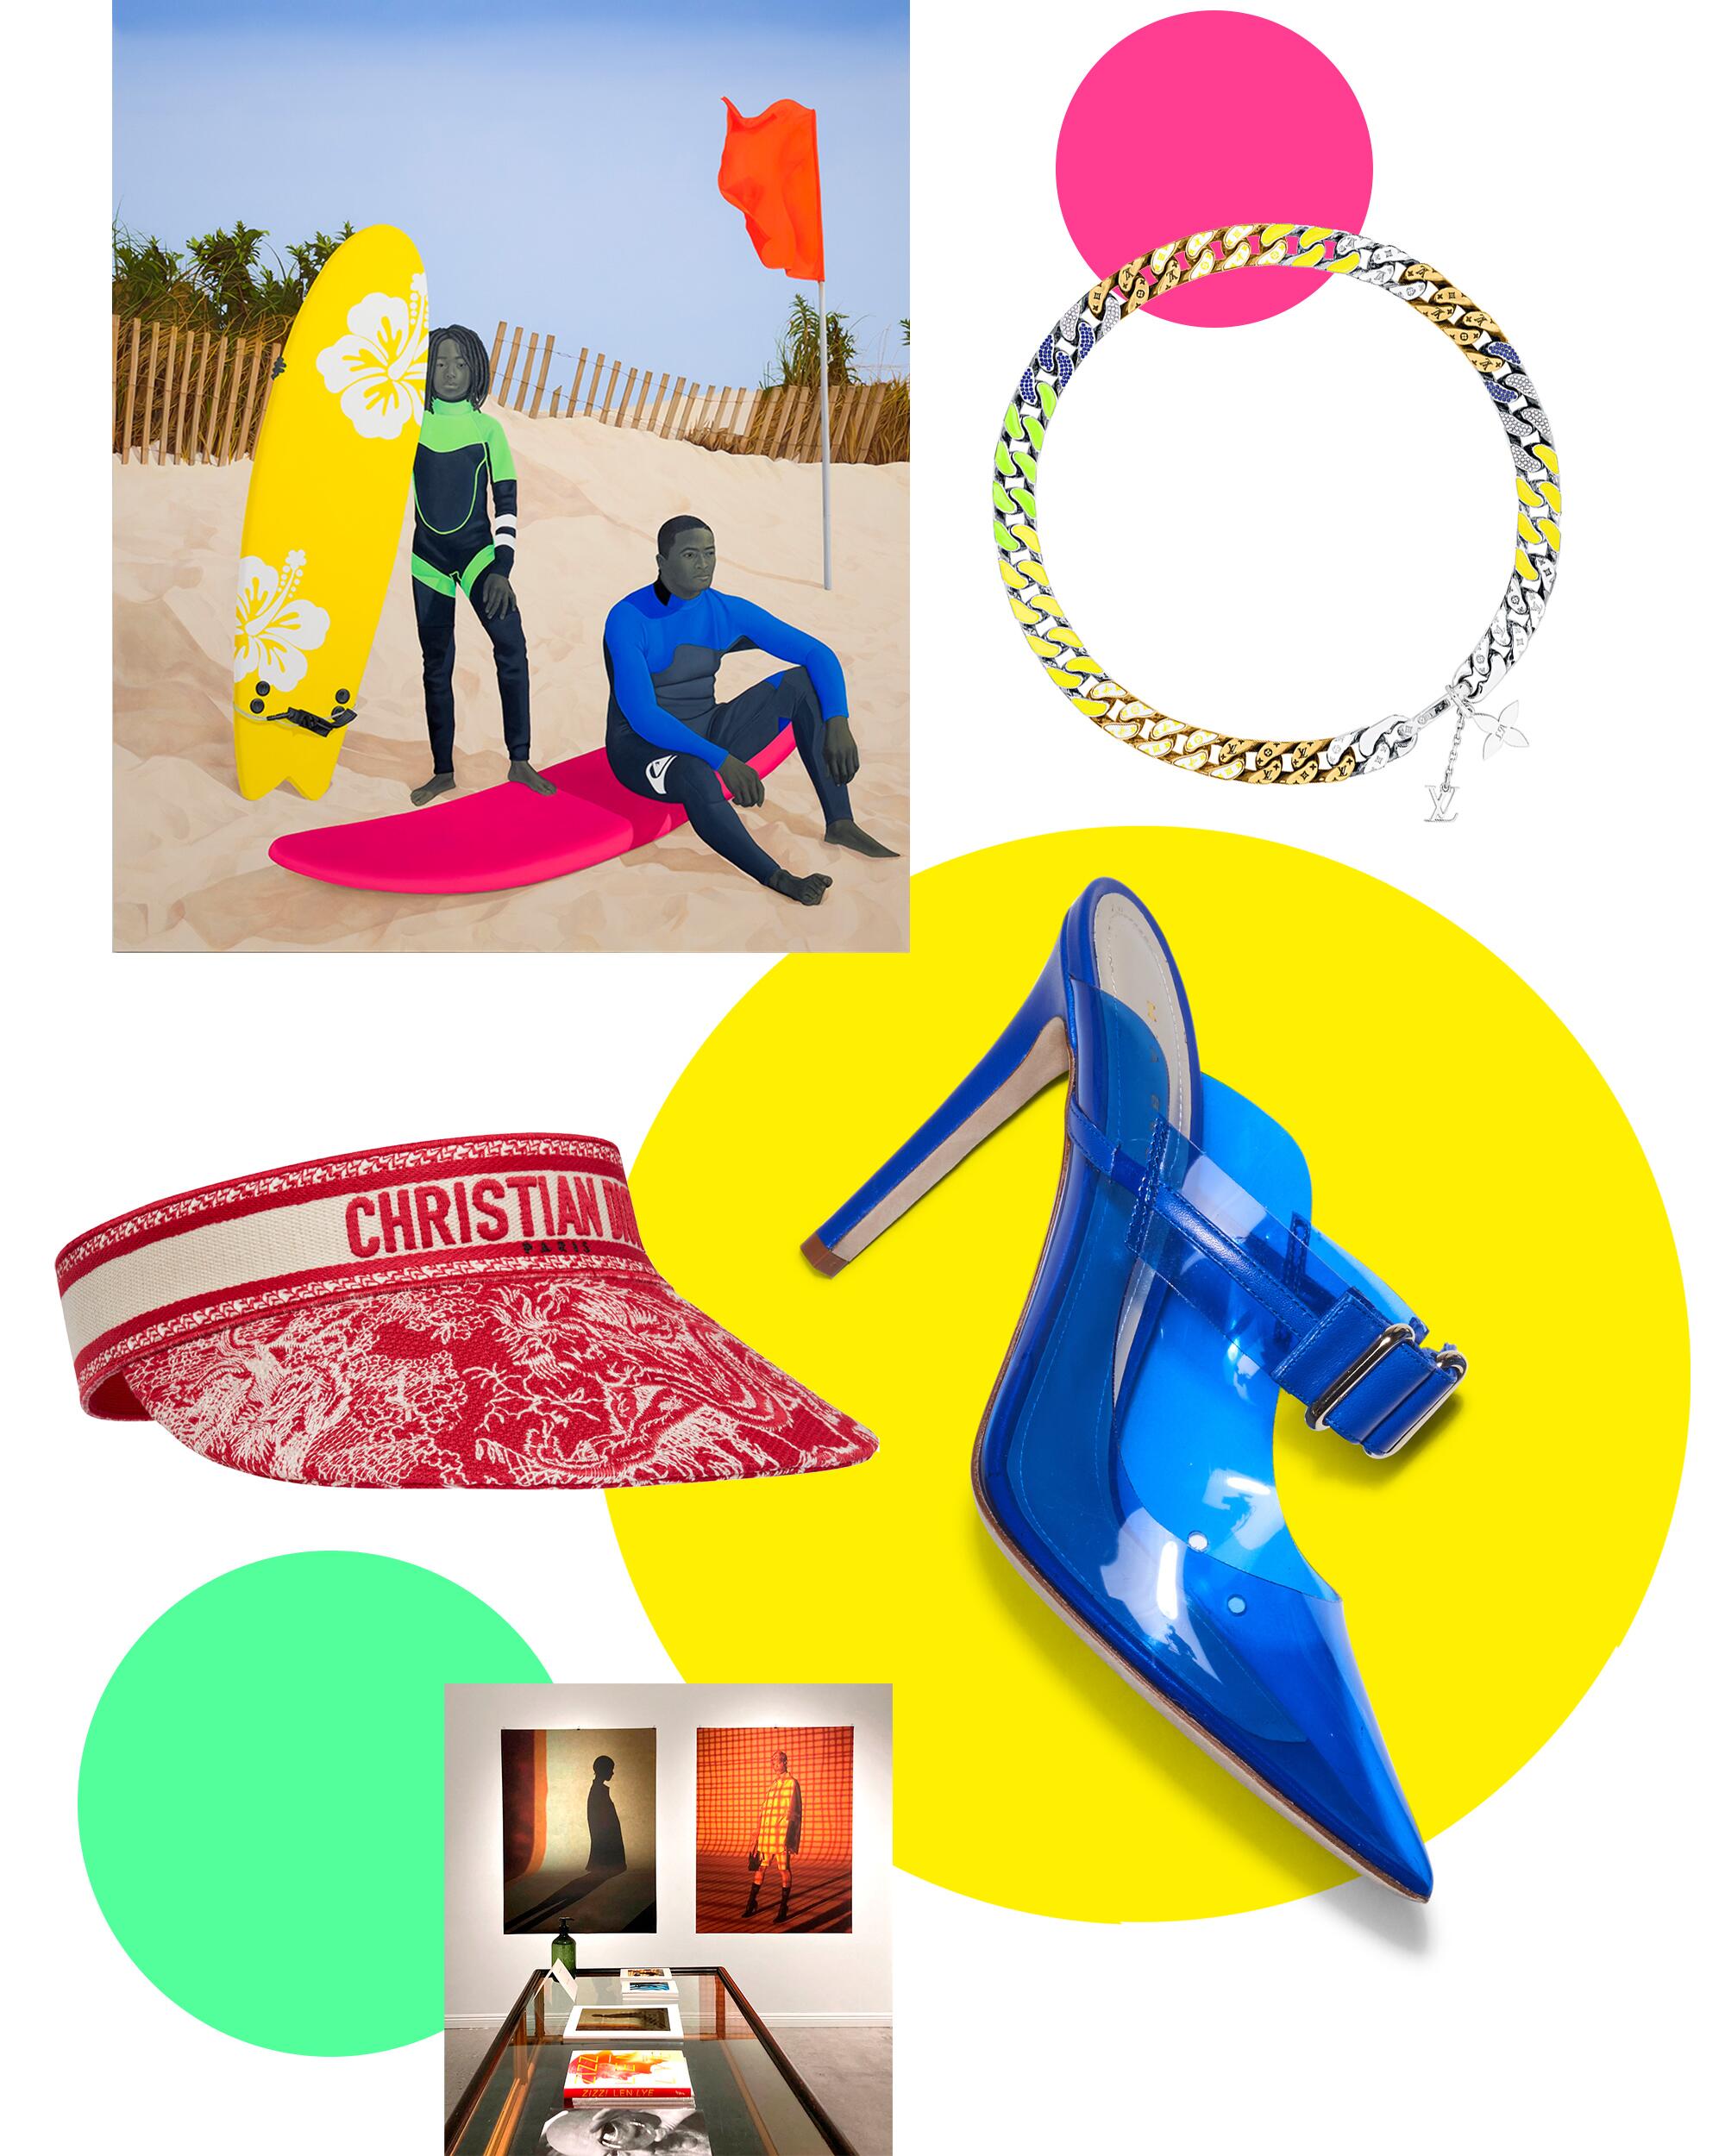 Collage of luxury items, an Amy Sherald painting of two Black surfers on a beach, a Dries Van Noten installation